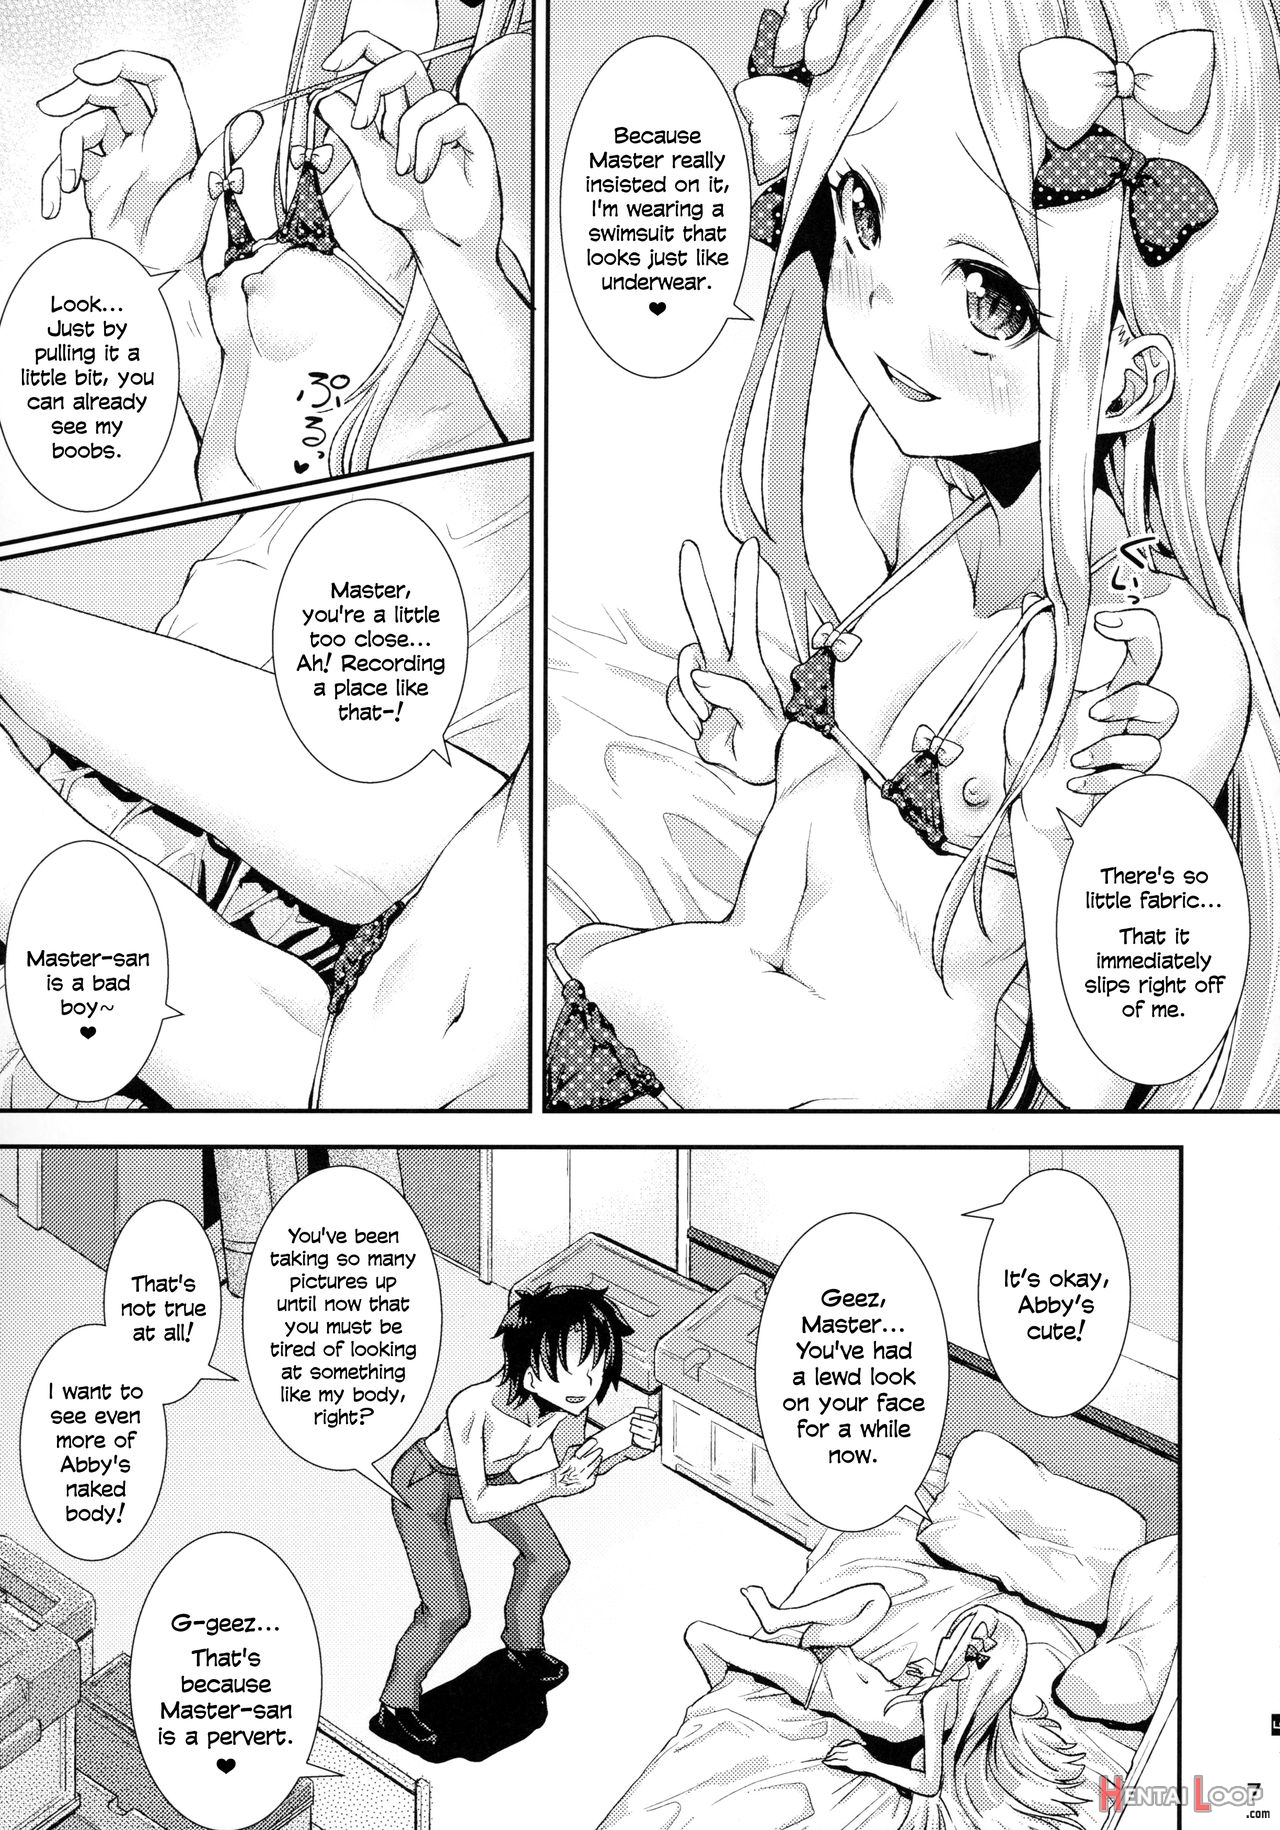 Page 6 of Abby And The Secret Homemade Sex Tape (by Yamazaki Kana) pic